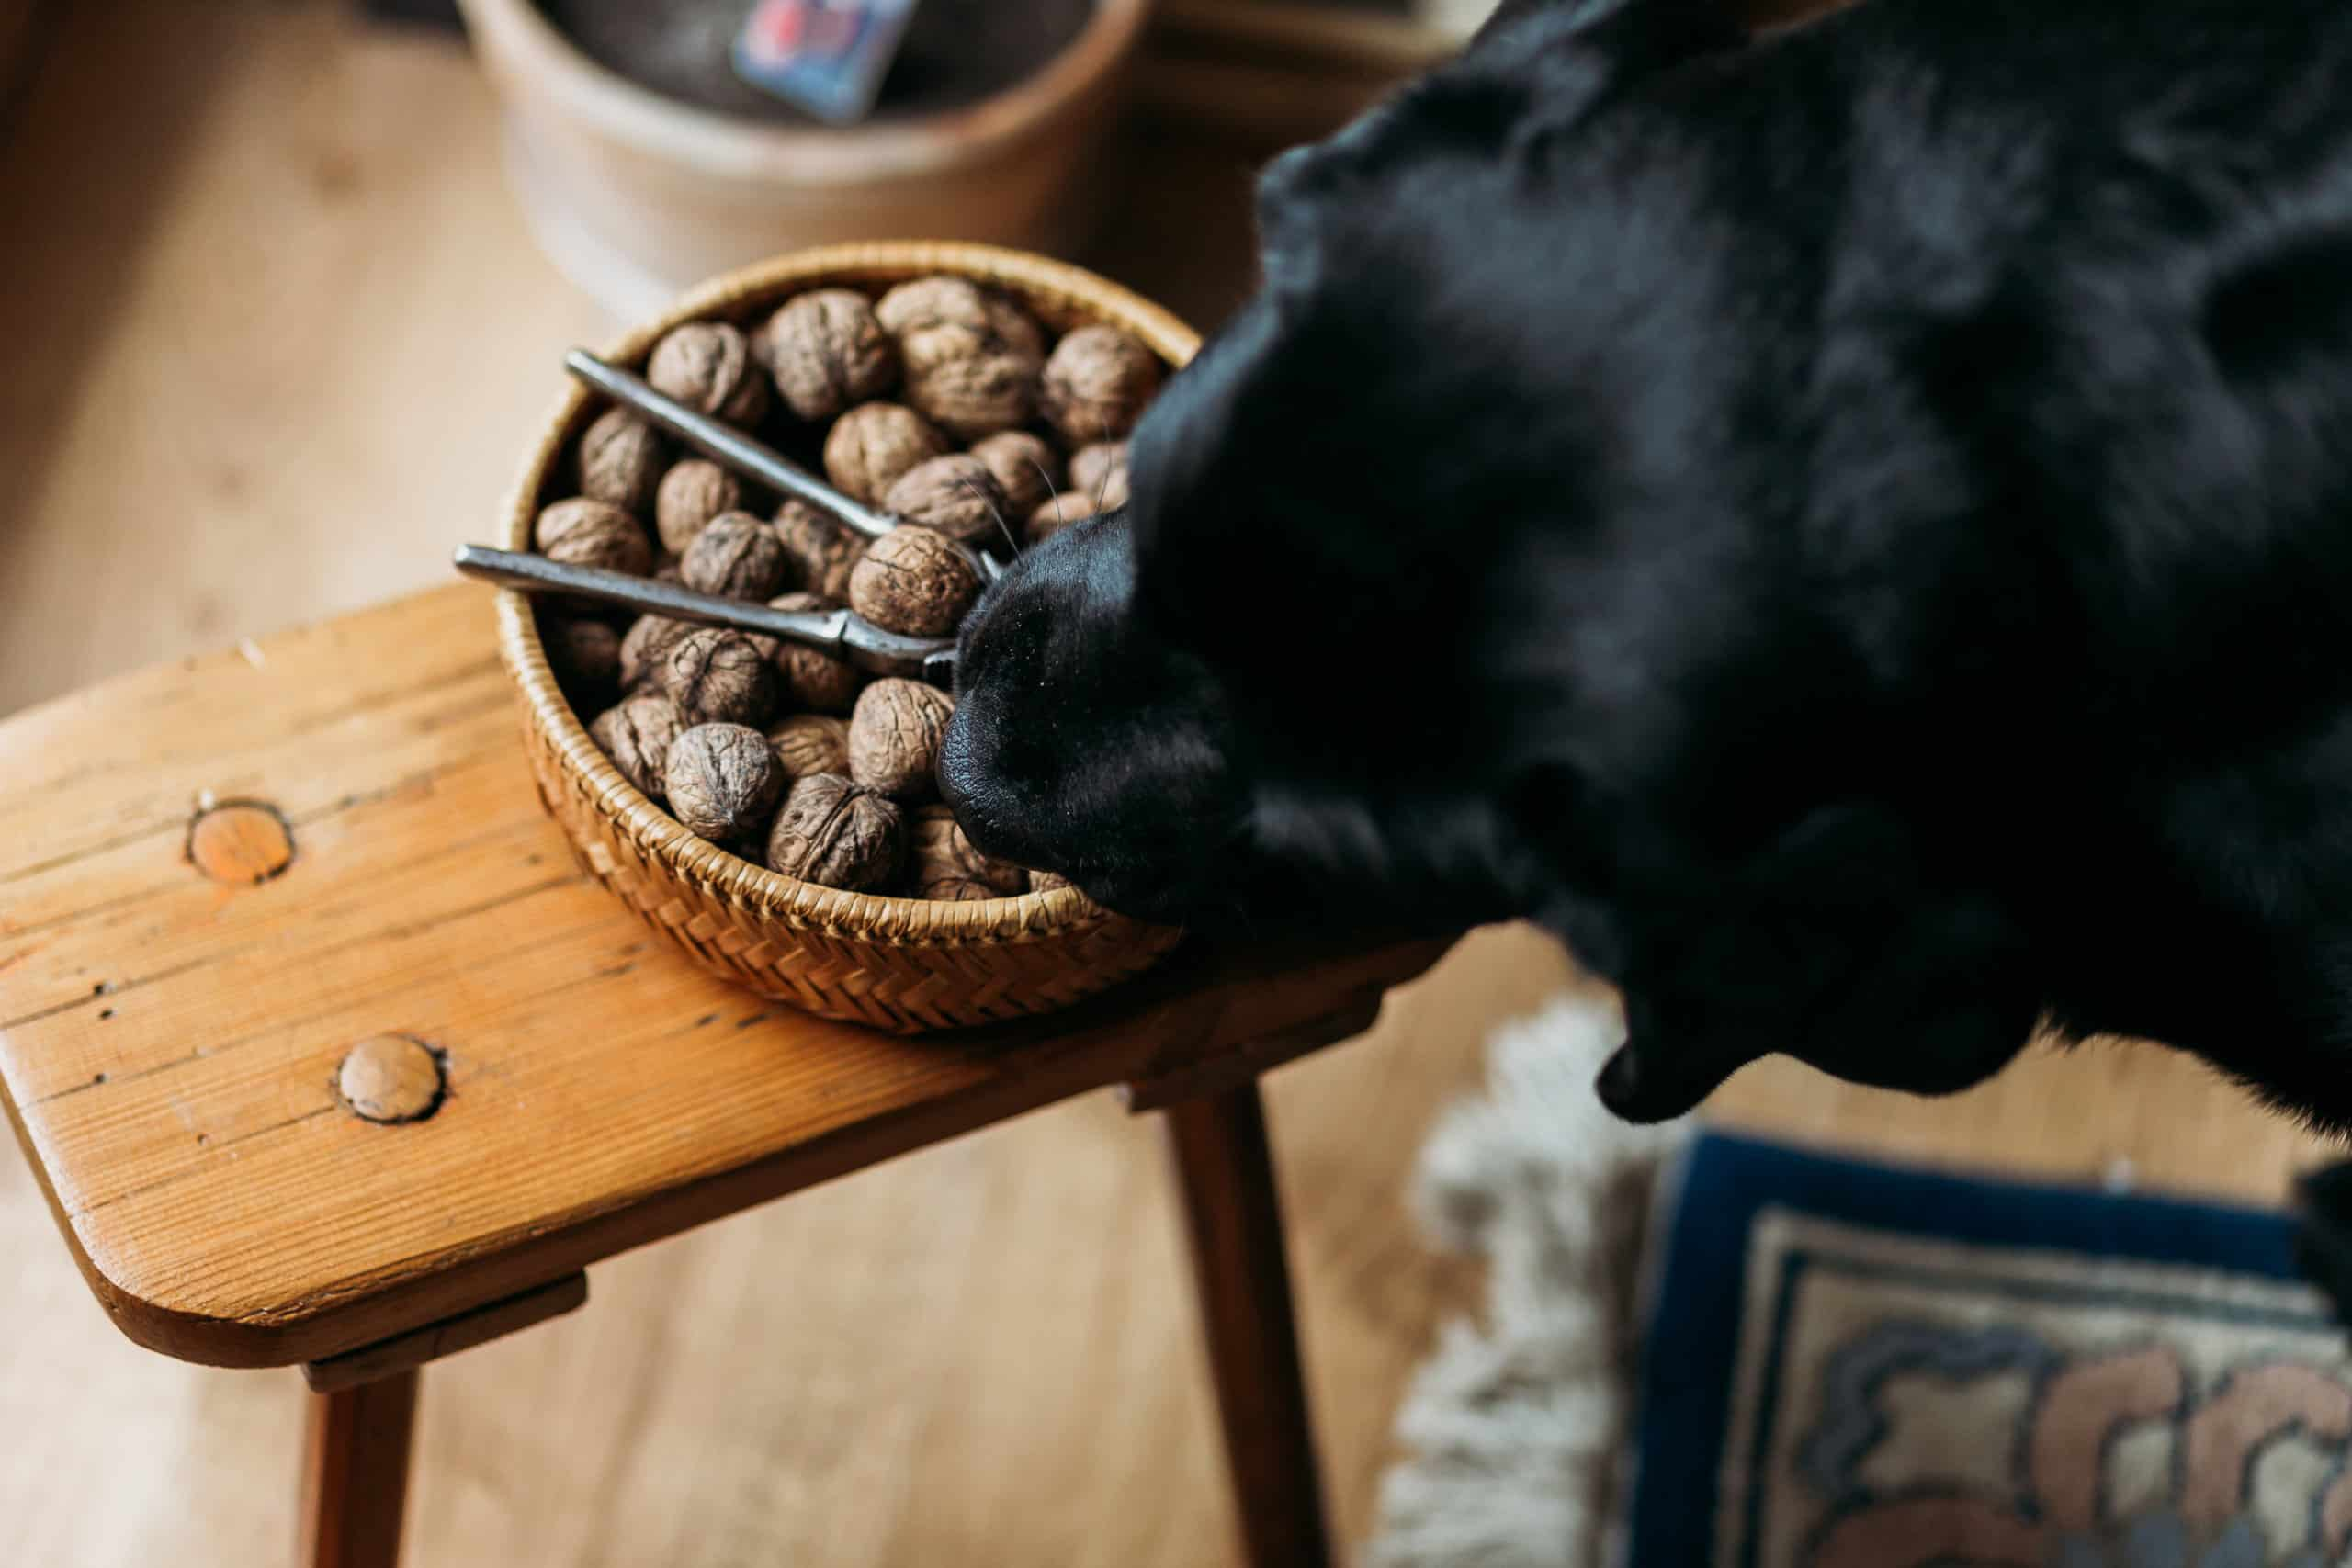 fa8f95f3 4d56 45a7 95b2 6369a52f7d77 Can Dogs Eat Walnuts? - Things You Need to Know if Your Dog Eats Them